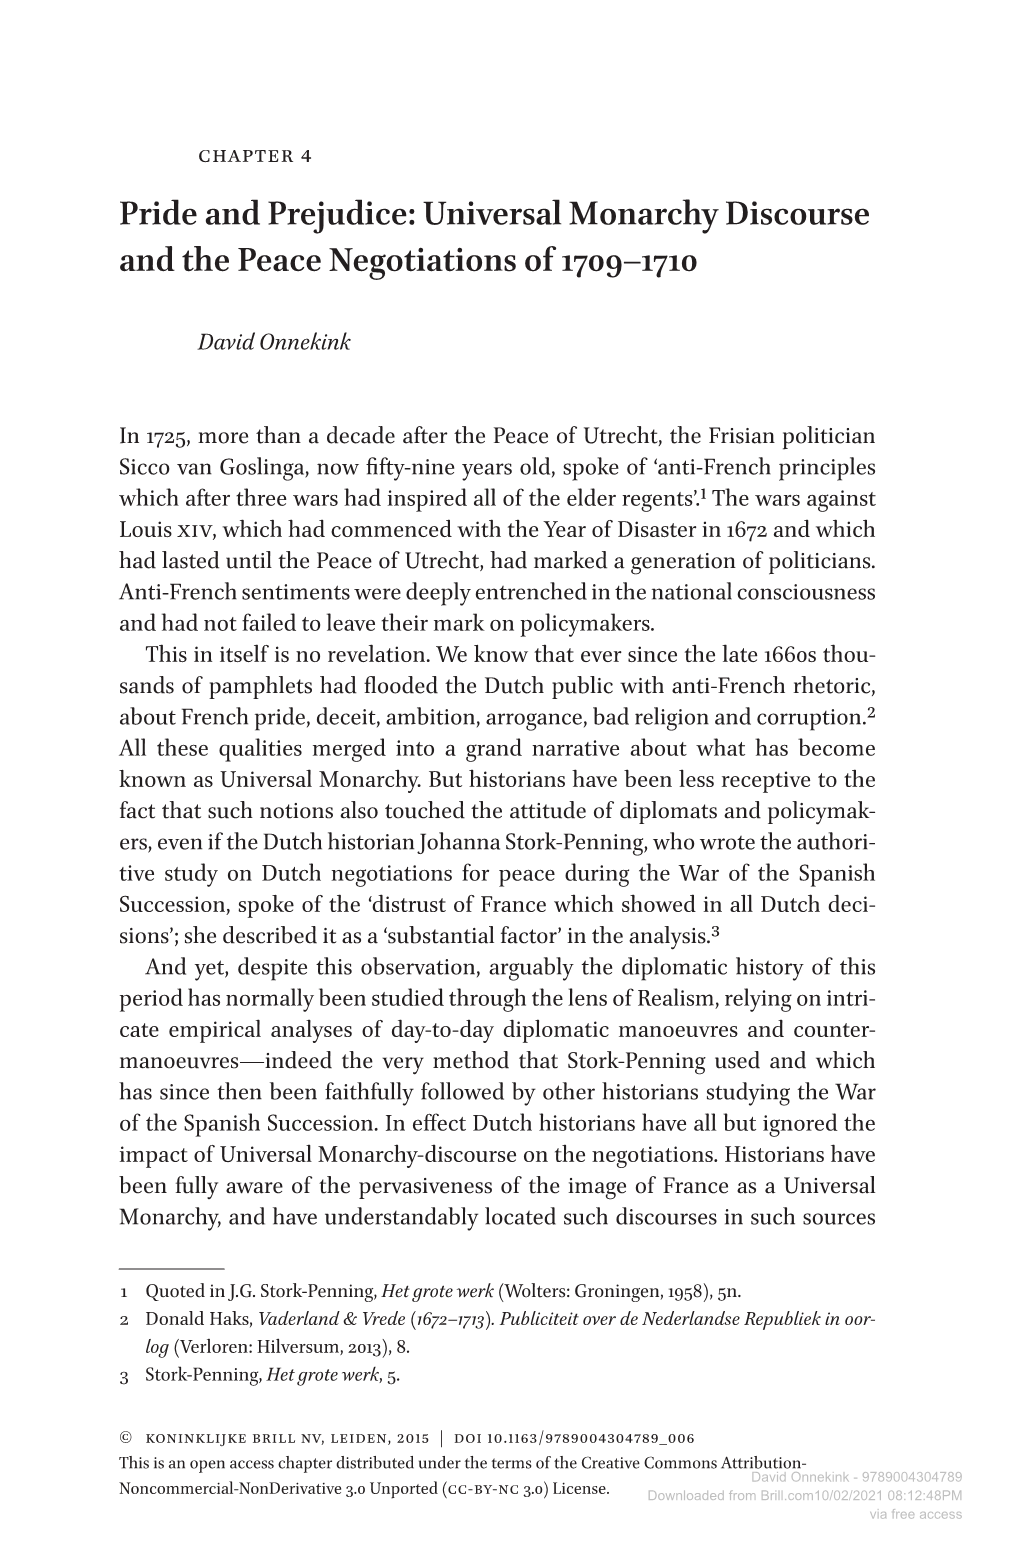 Universal Monarchy Discourse and the Peace Negotiations of 1709–1710